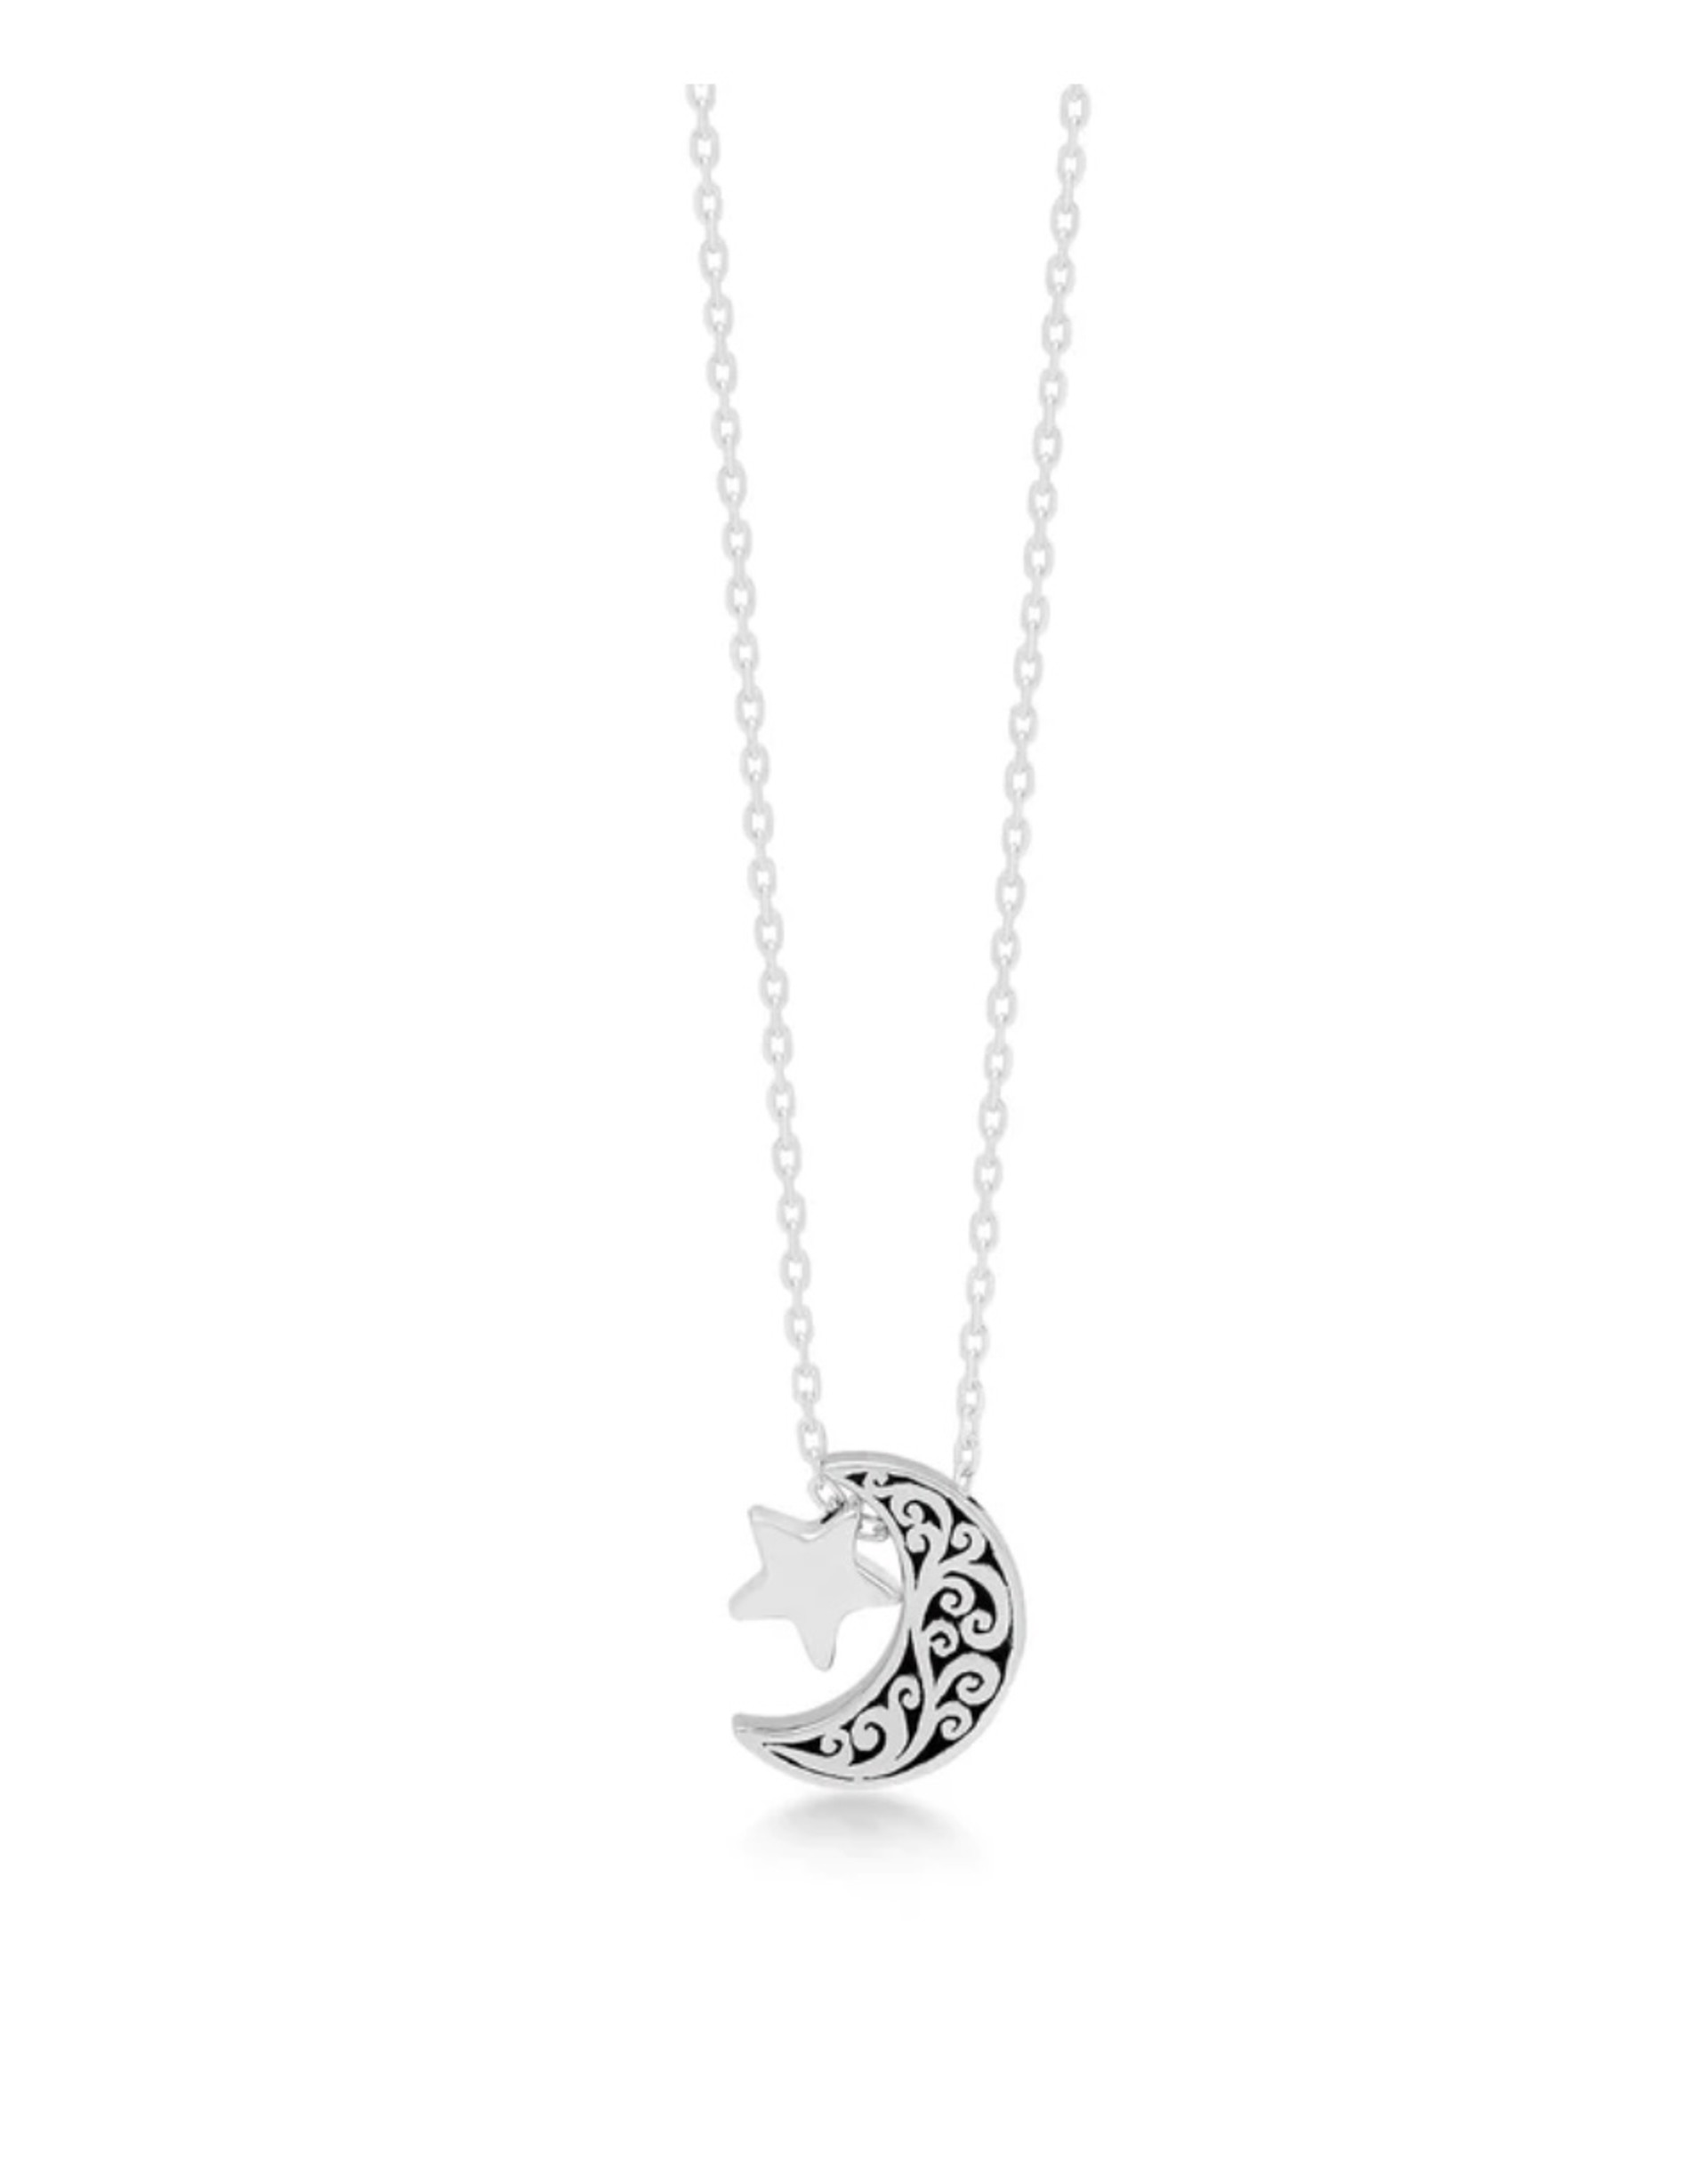 LH Signature Scroll Petite Moon with Star Pendant Necklace by Lois Hill